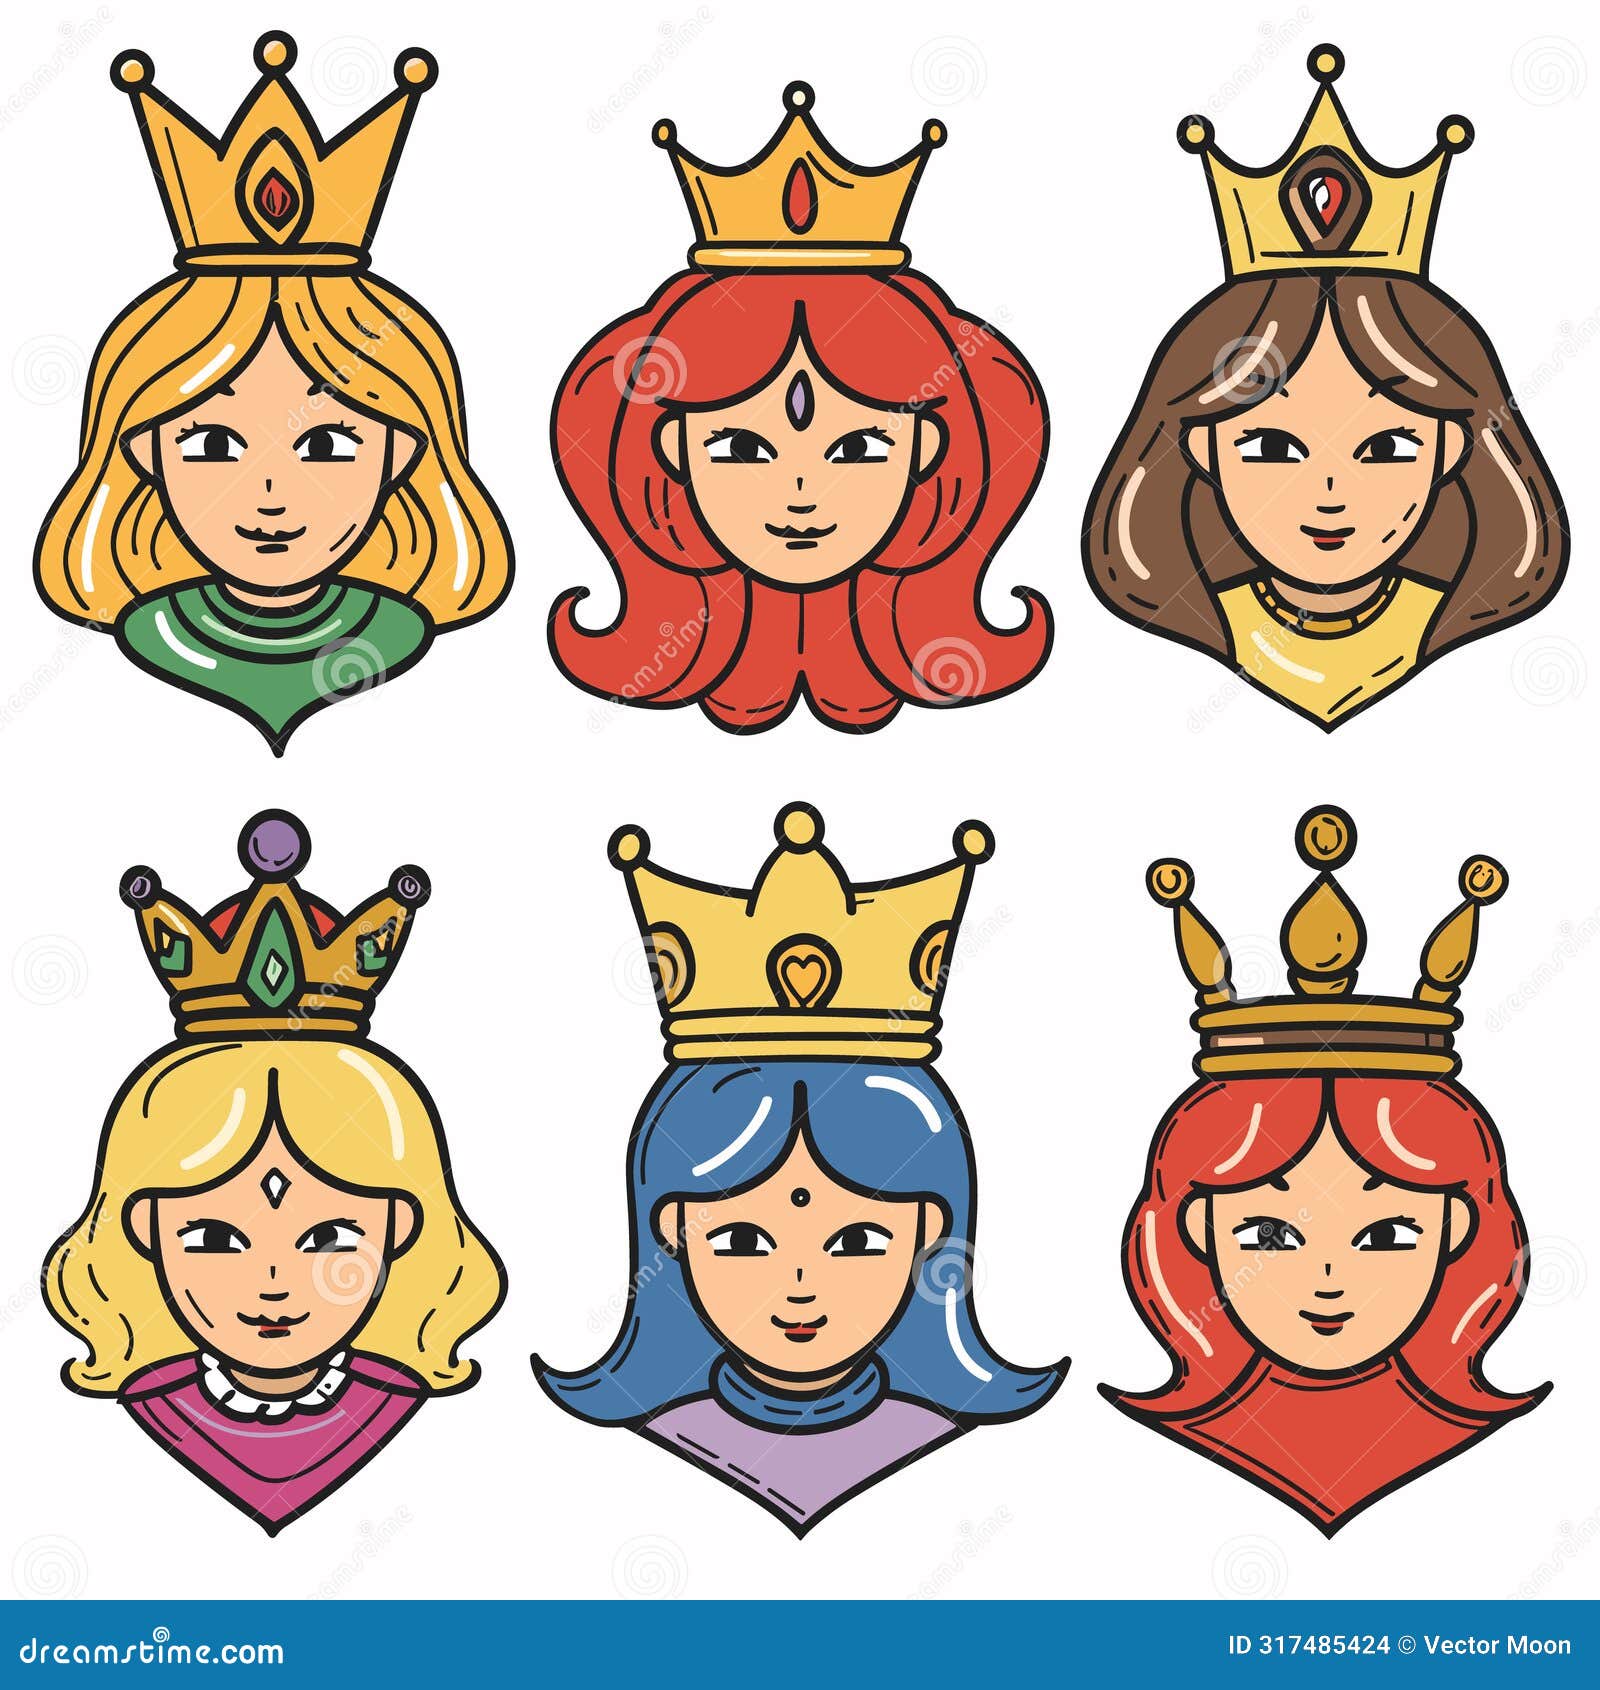 six princesses cartoon characters wearing crowns, diverse hairstyles outfits. cheerful young